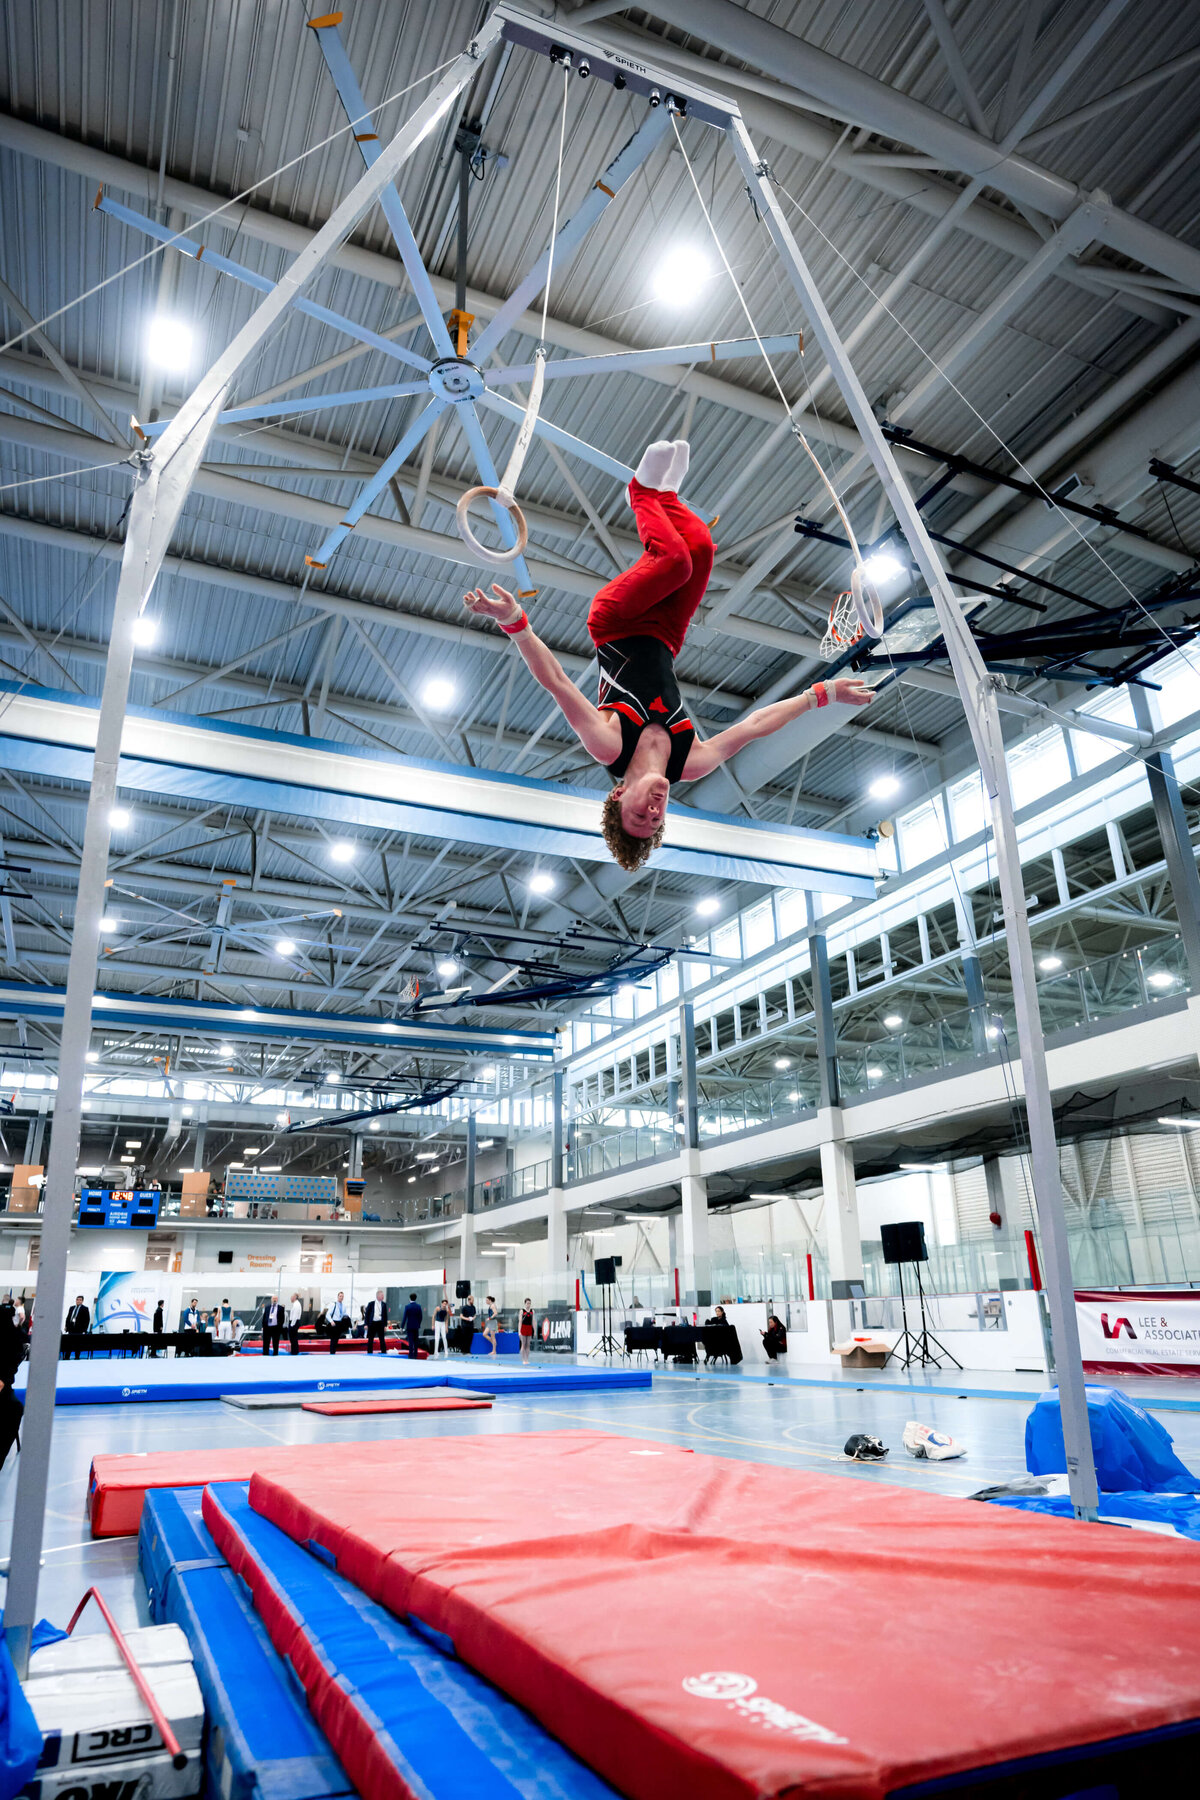 Photo by Luke O'Geil taken at the 2023 inaugural Grizzly Classic men's artistic gymnastics competitionA9_00518